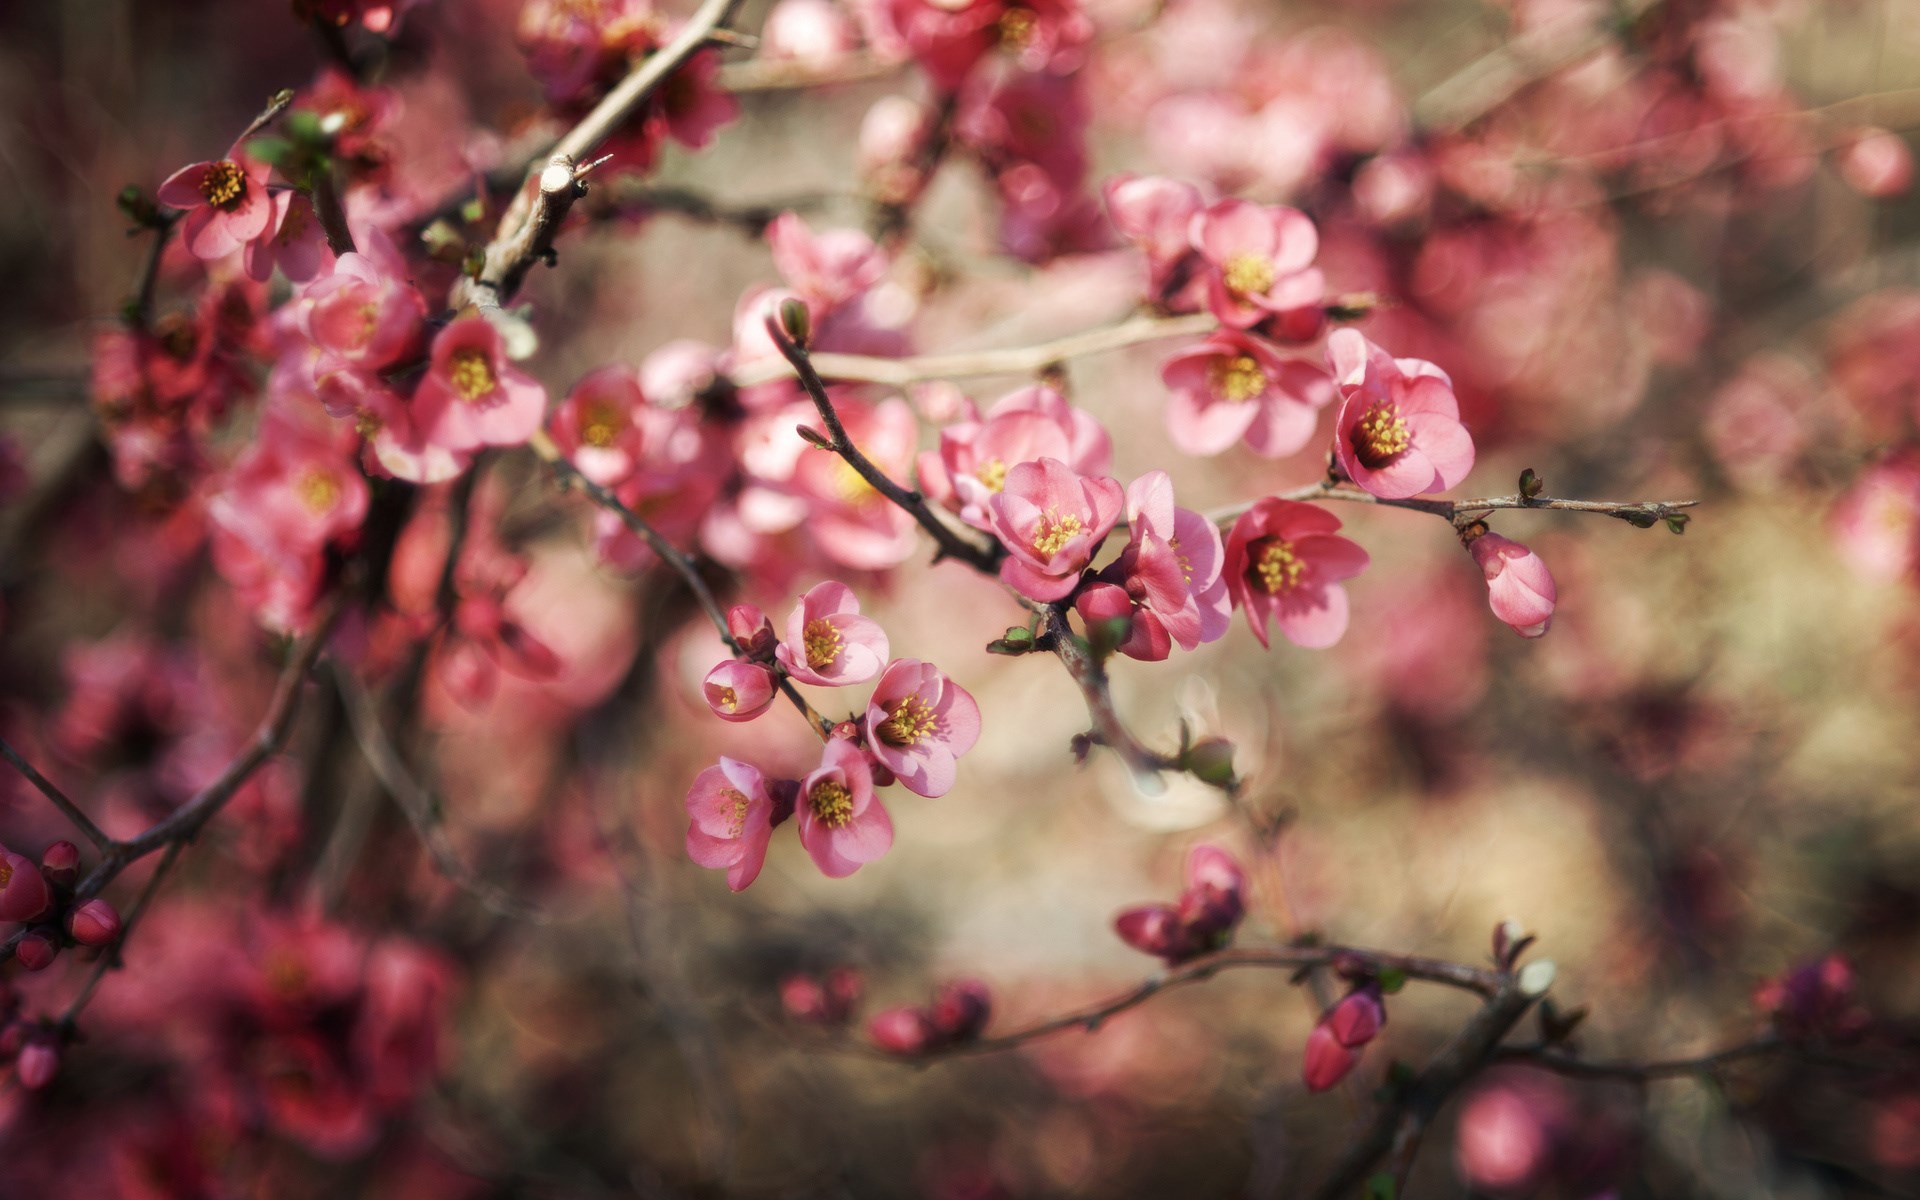 Branches Flowers Pink Spring Nature wallpaper | 1920x1200 | #22655